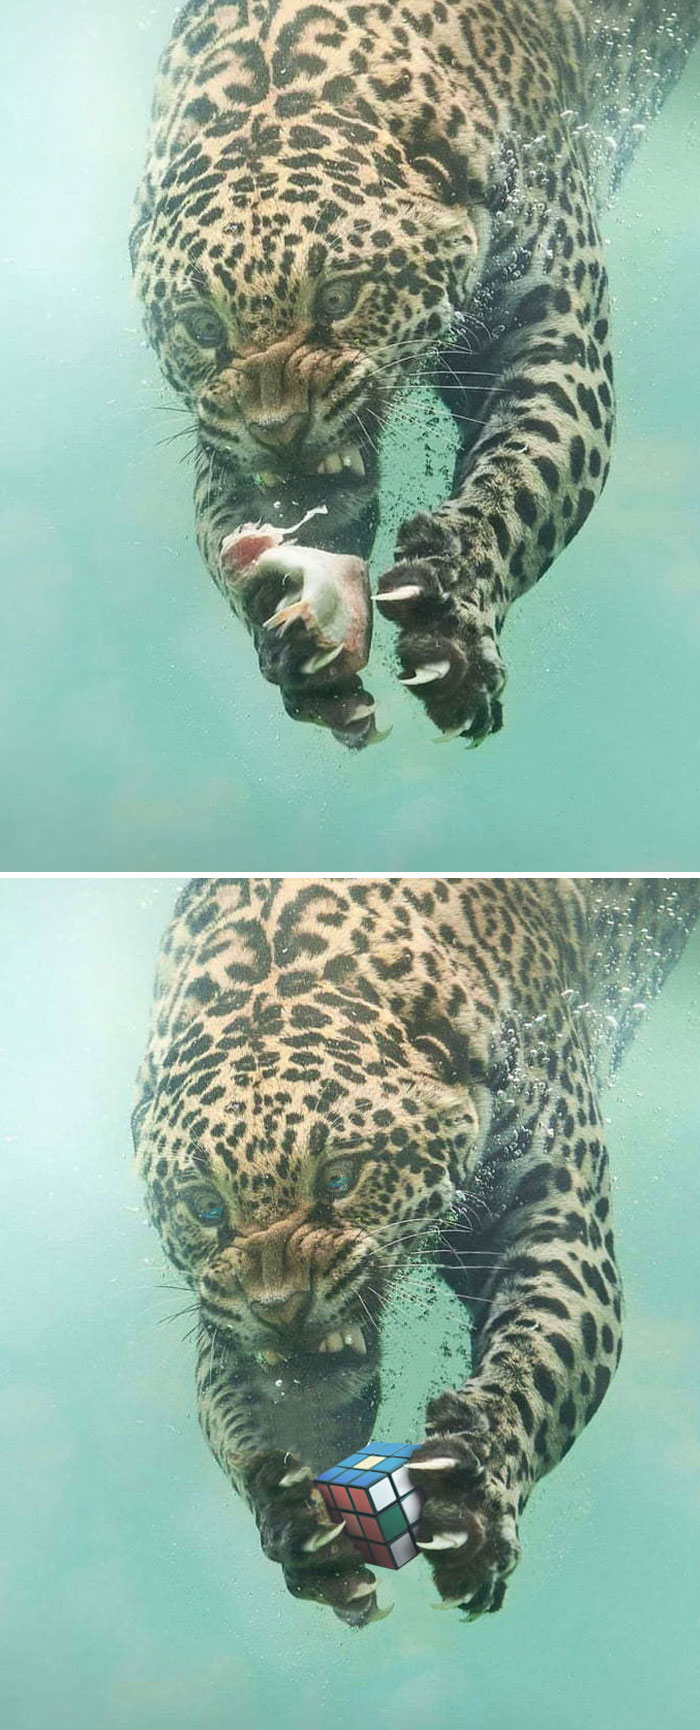 This Fishing Leopard